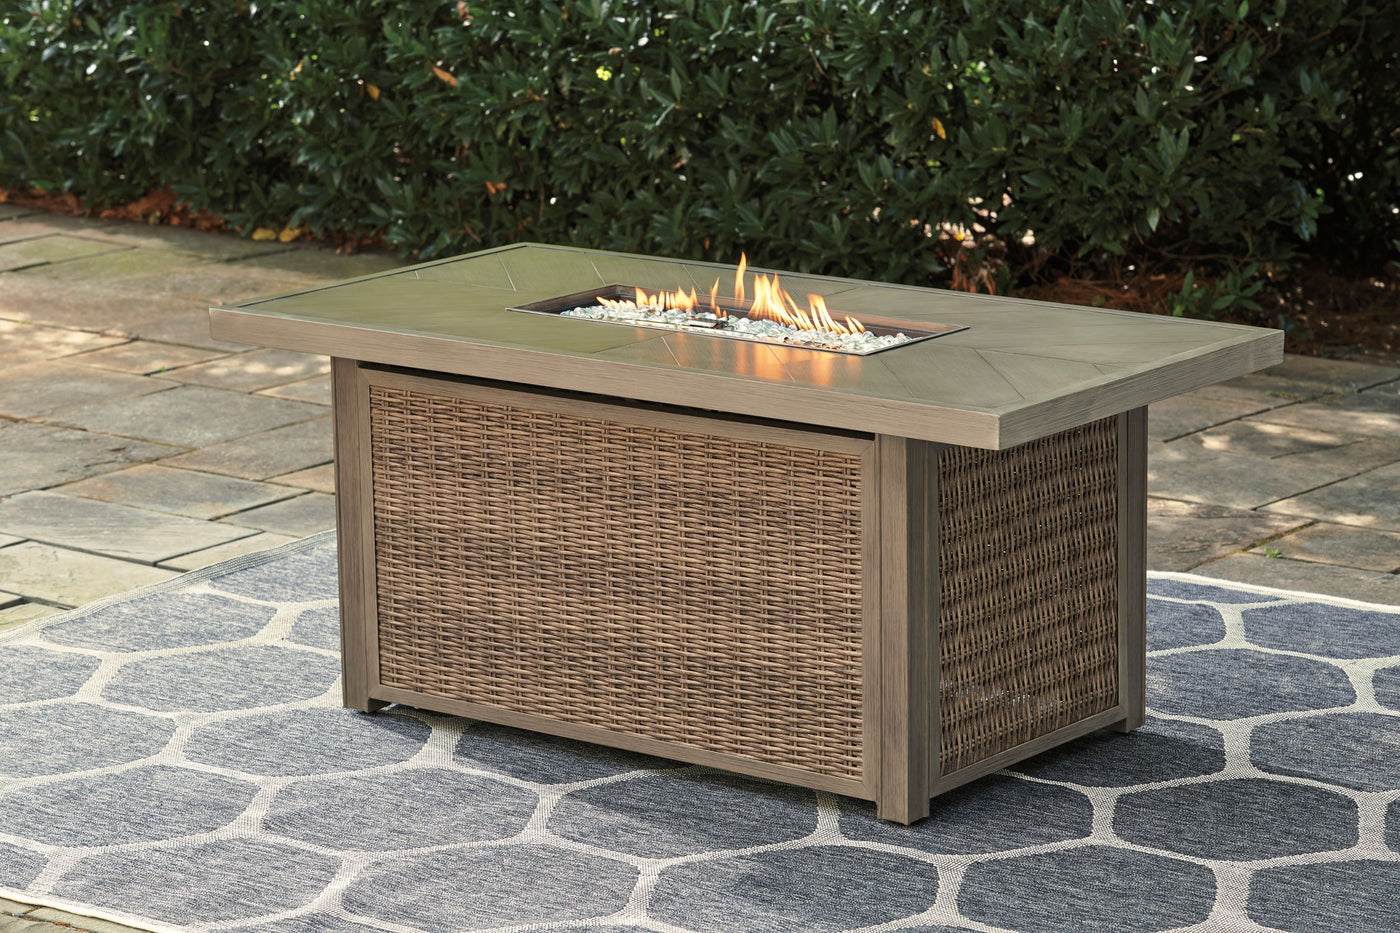 Beachcroft - Outdoor Fire Pit Table - Brown